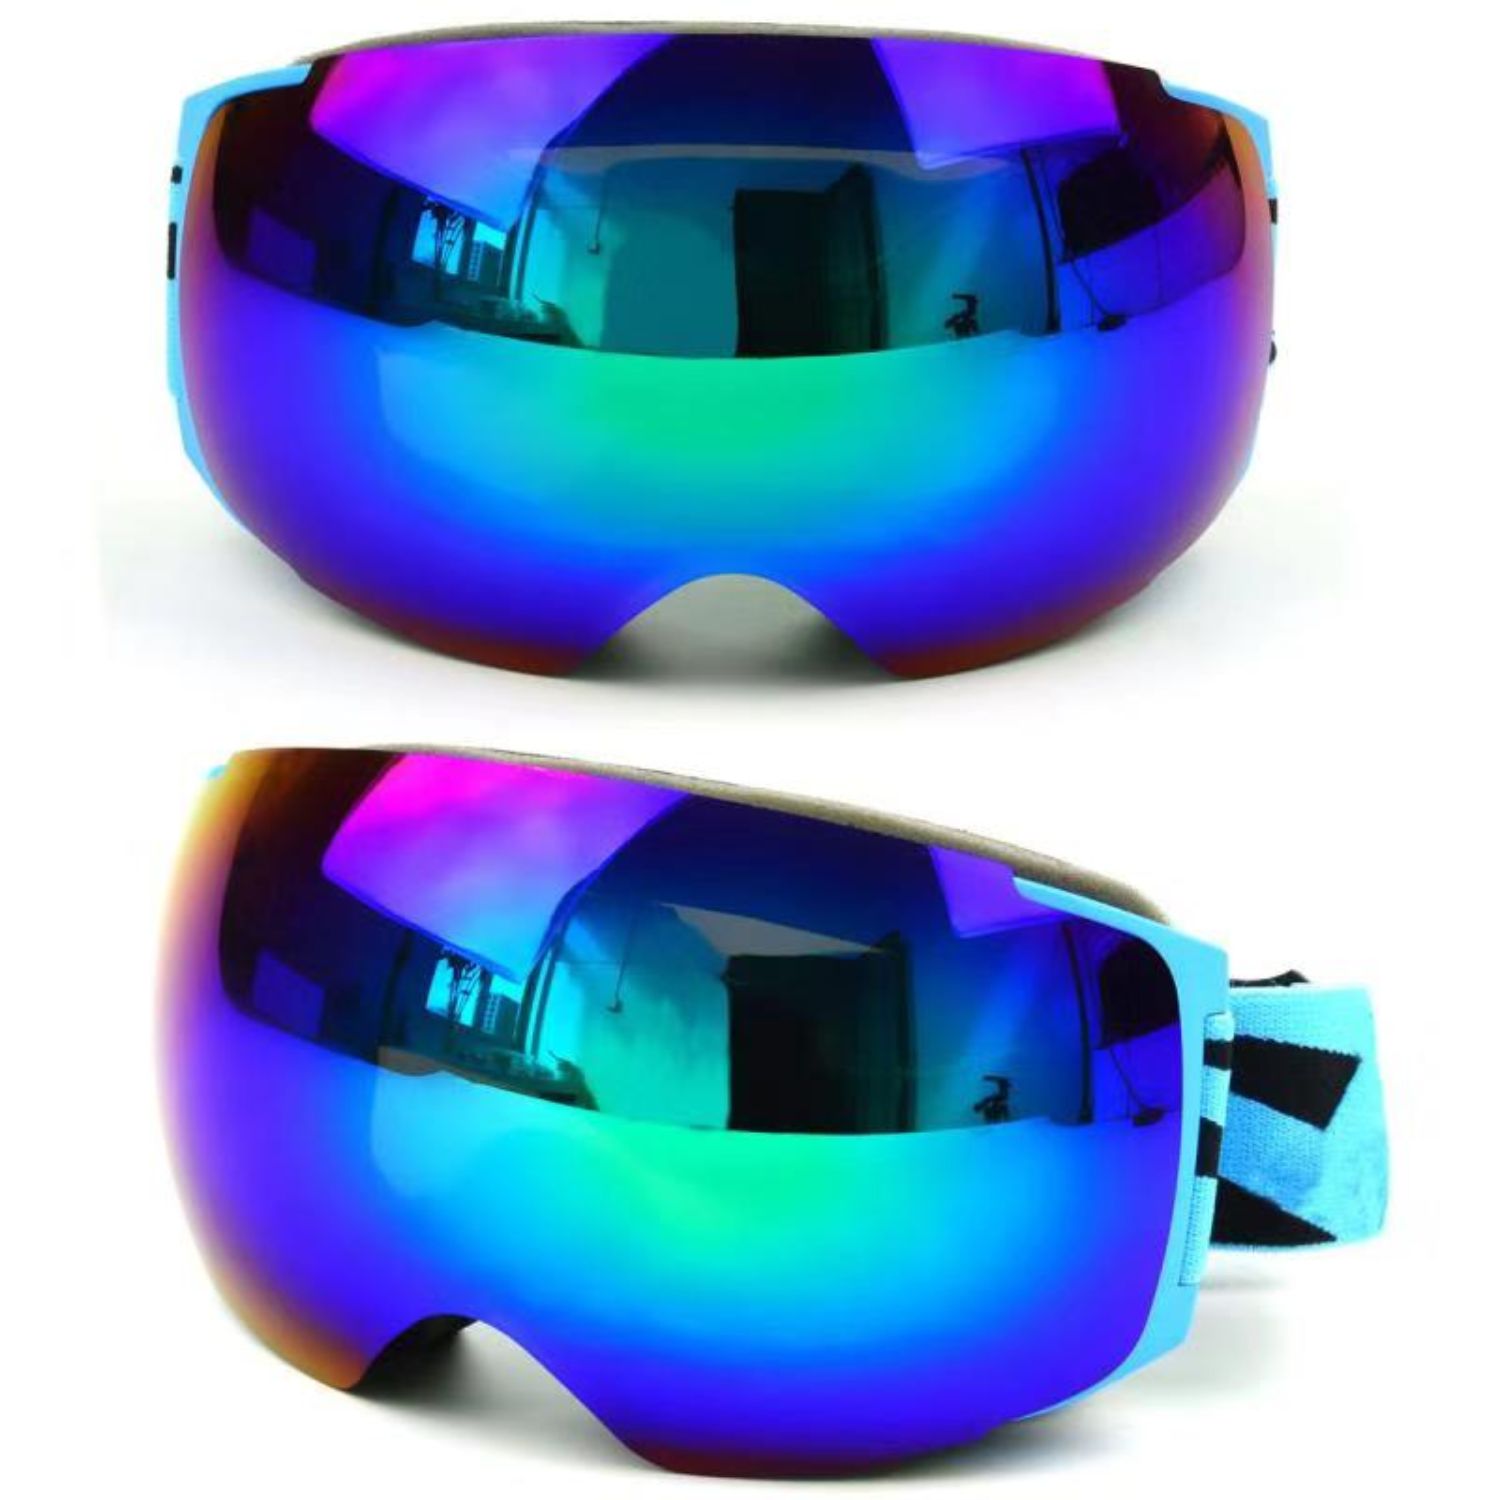 SG02 - Outdoor Ski Snowboard GOGGLES for Men and Women UV Protection